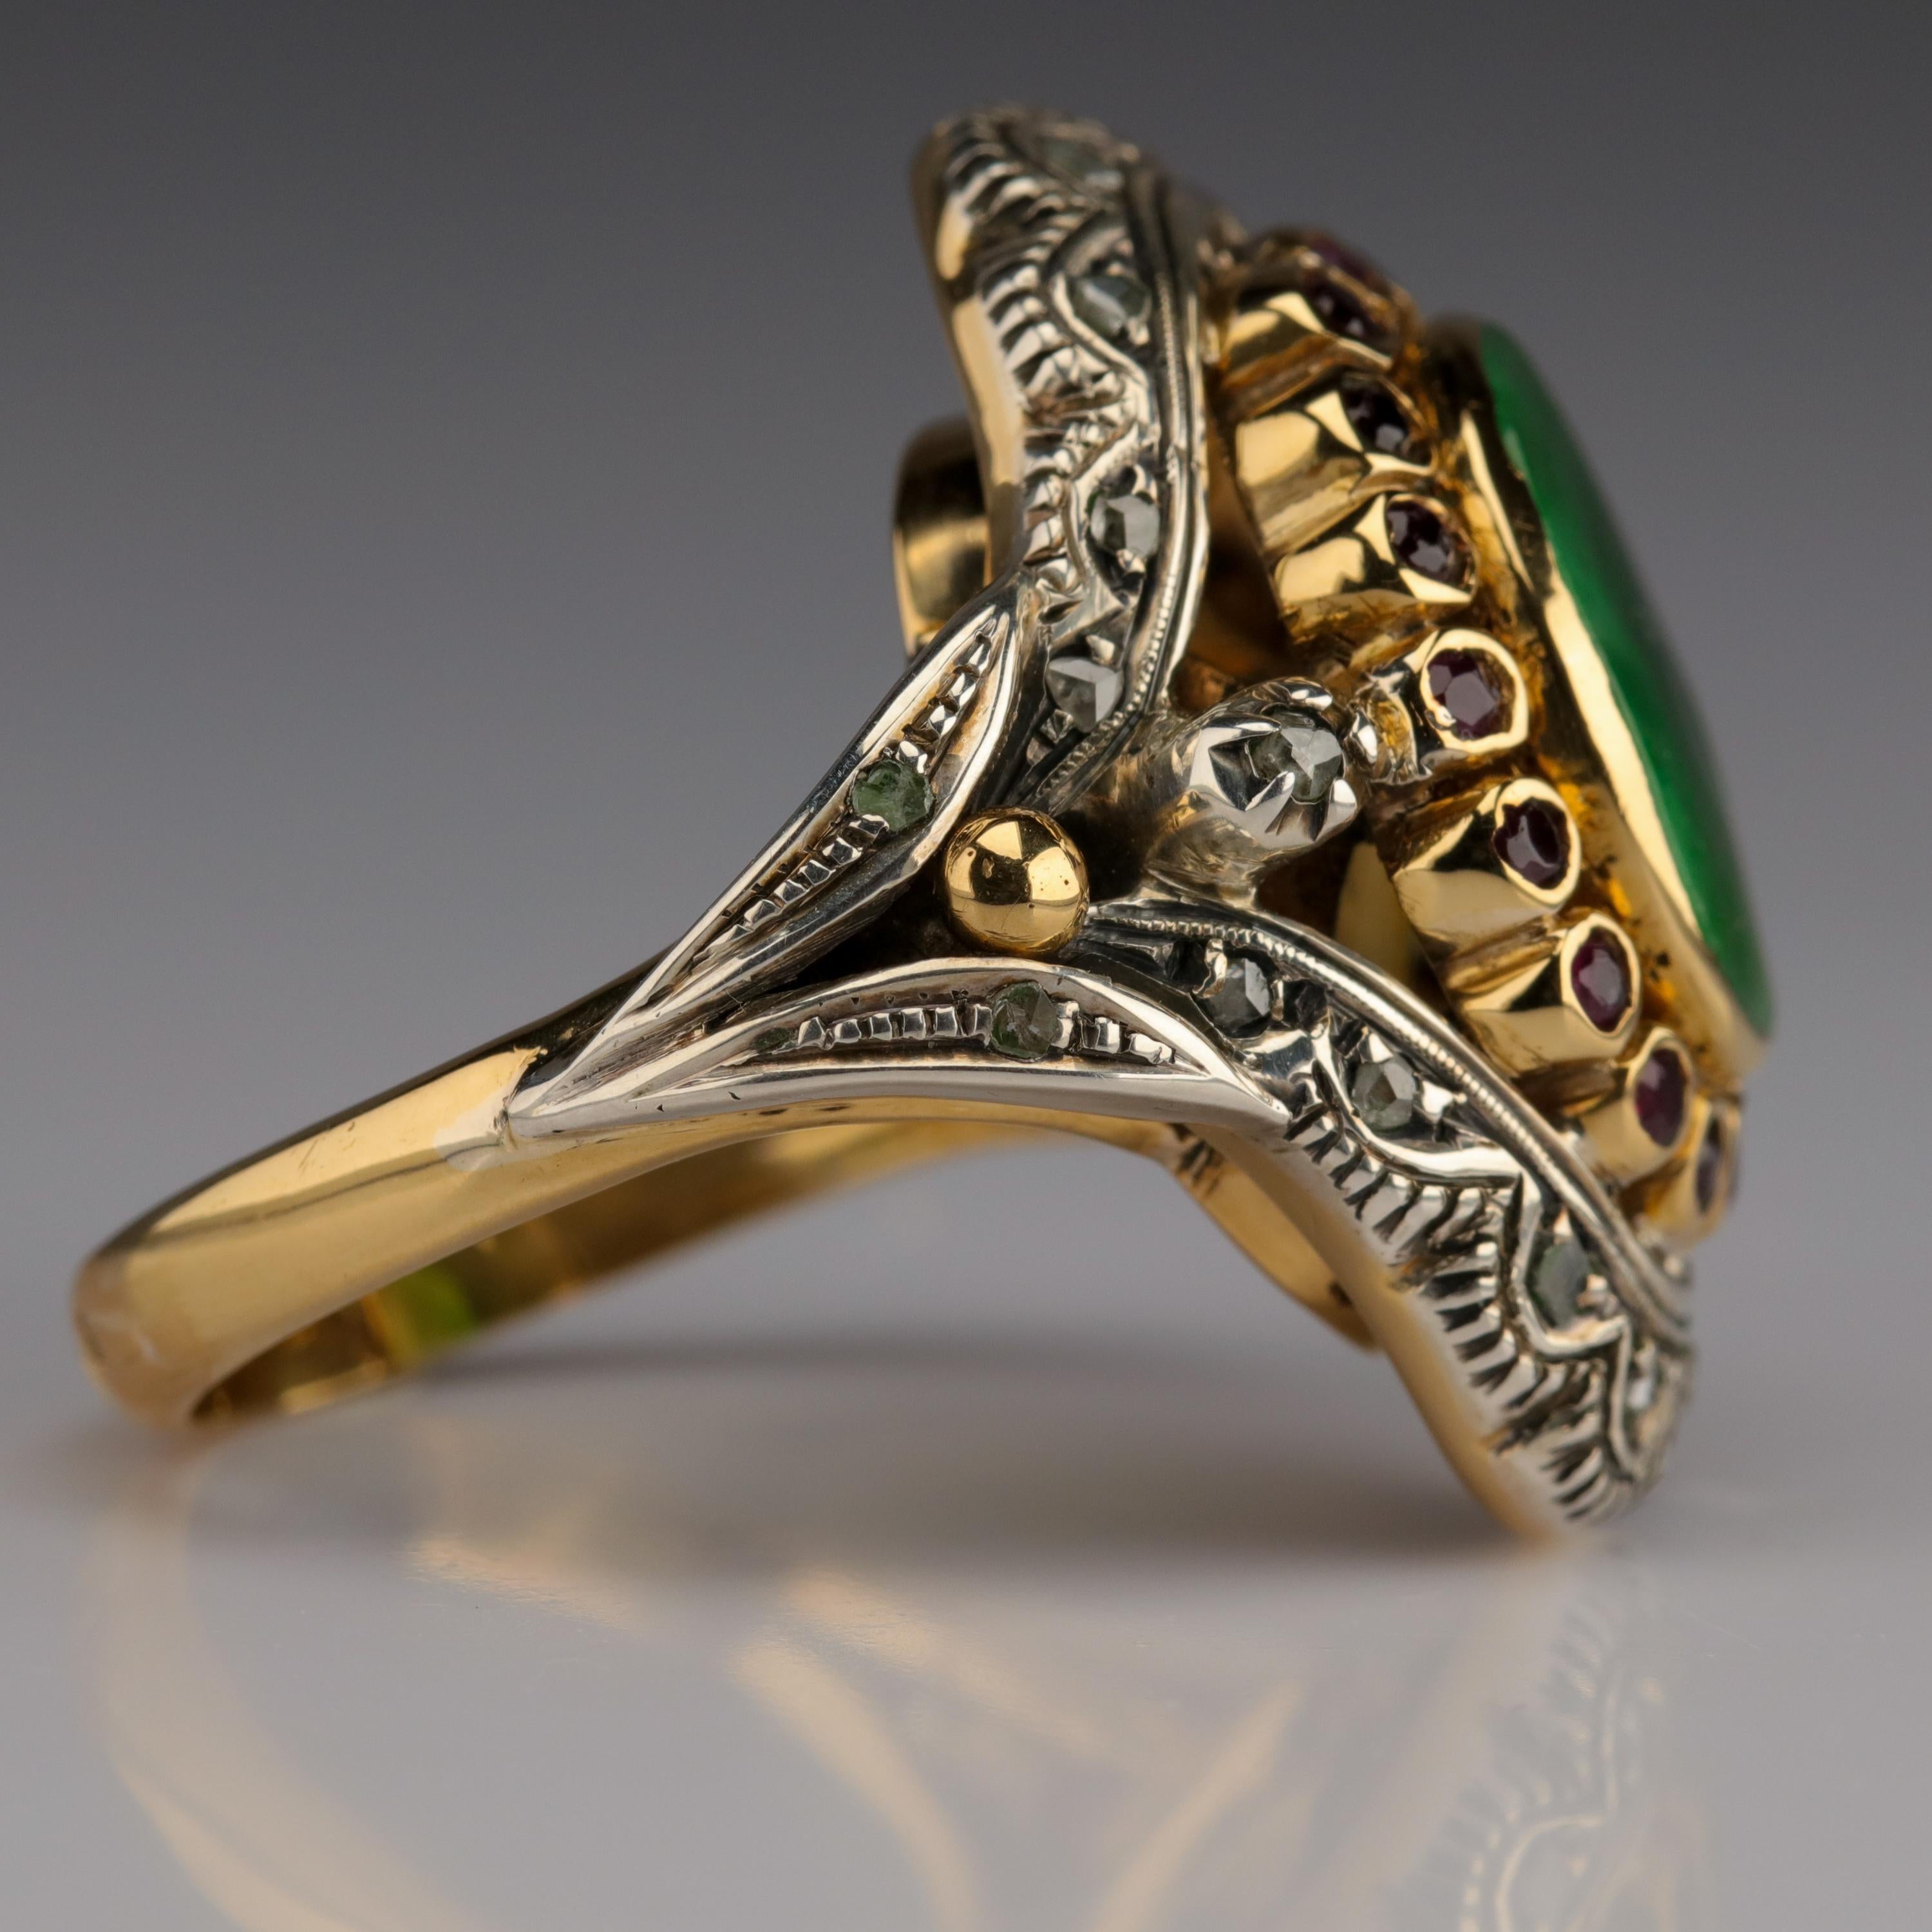 Women's or Men's Antique Jade Ring with Rubies & Diamonds in Gold and Silver Eccentric and Ornate